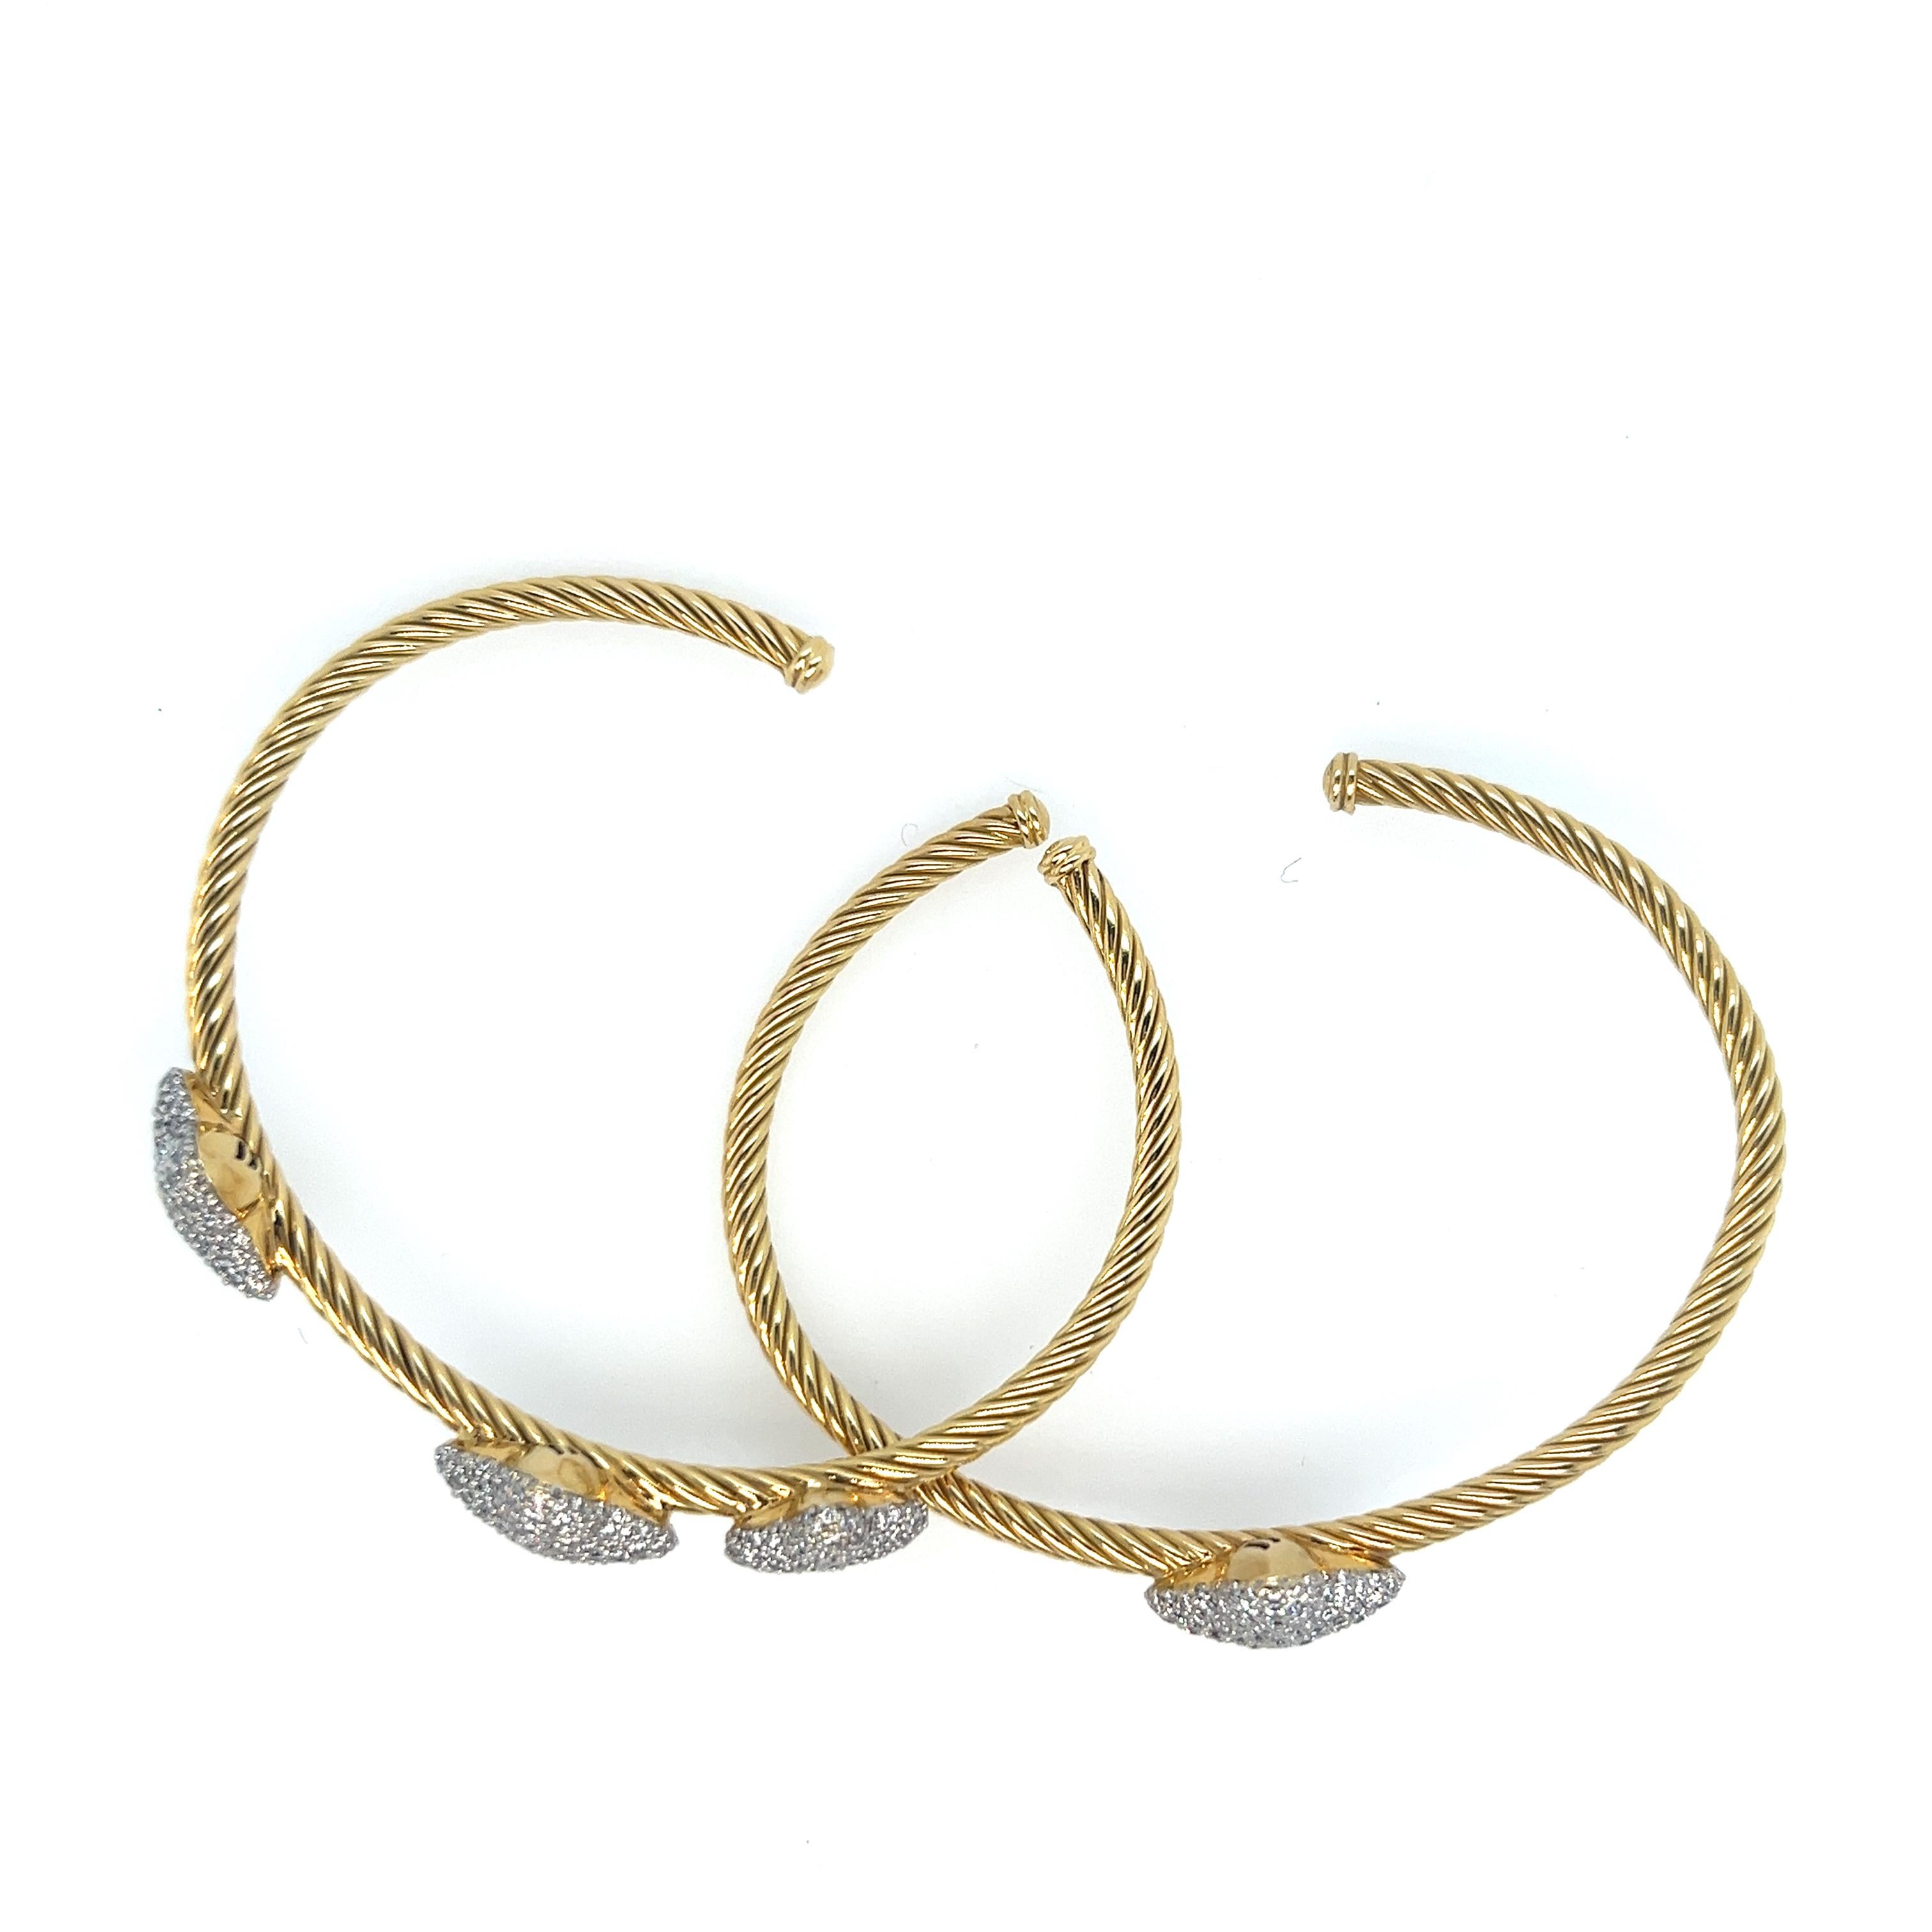 Gorgeous David Yurman 18kt two tone bangles.  This stunning pair of cuff bangles have pave round, brilliant diamonds that sparkle from every angle.  There are 2.5cts total weight.  The great thing is you can wear these together or single, or stacked